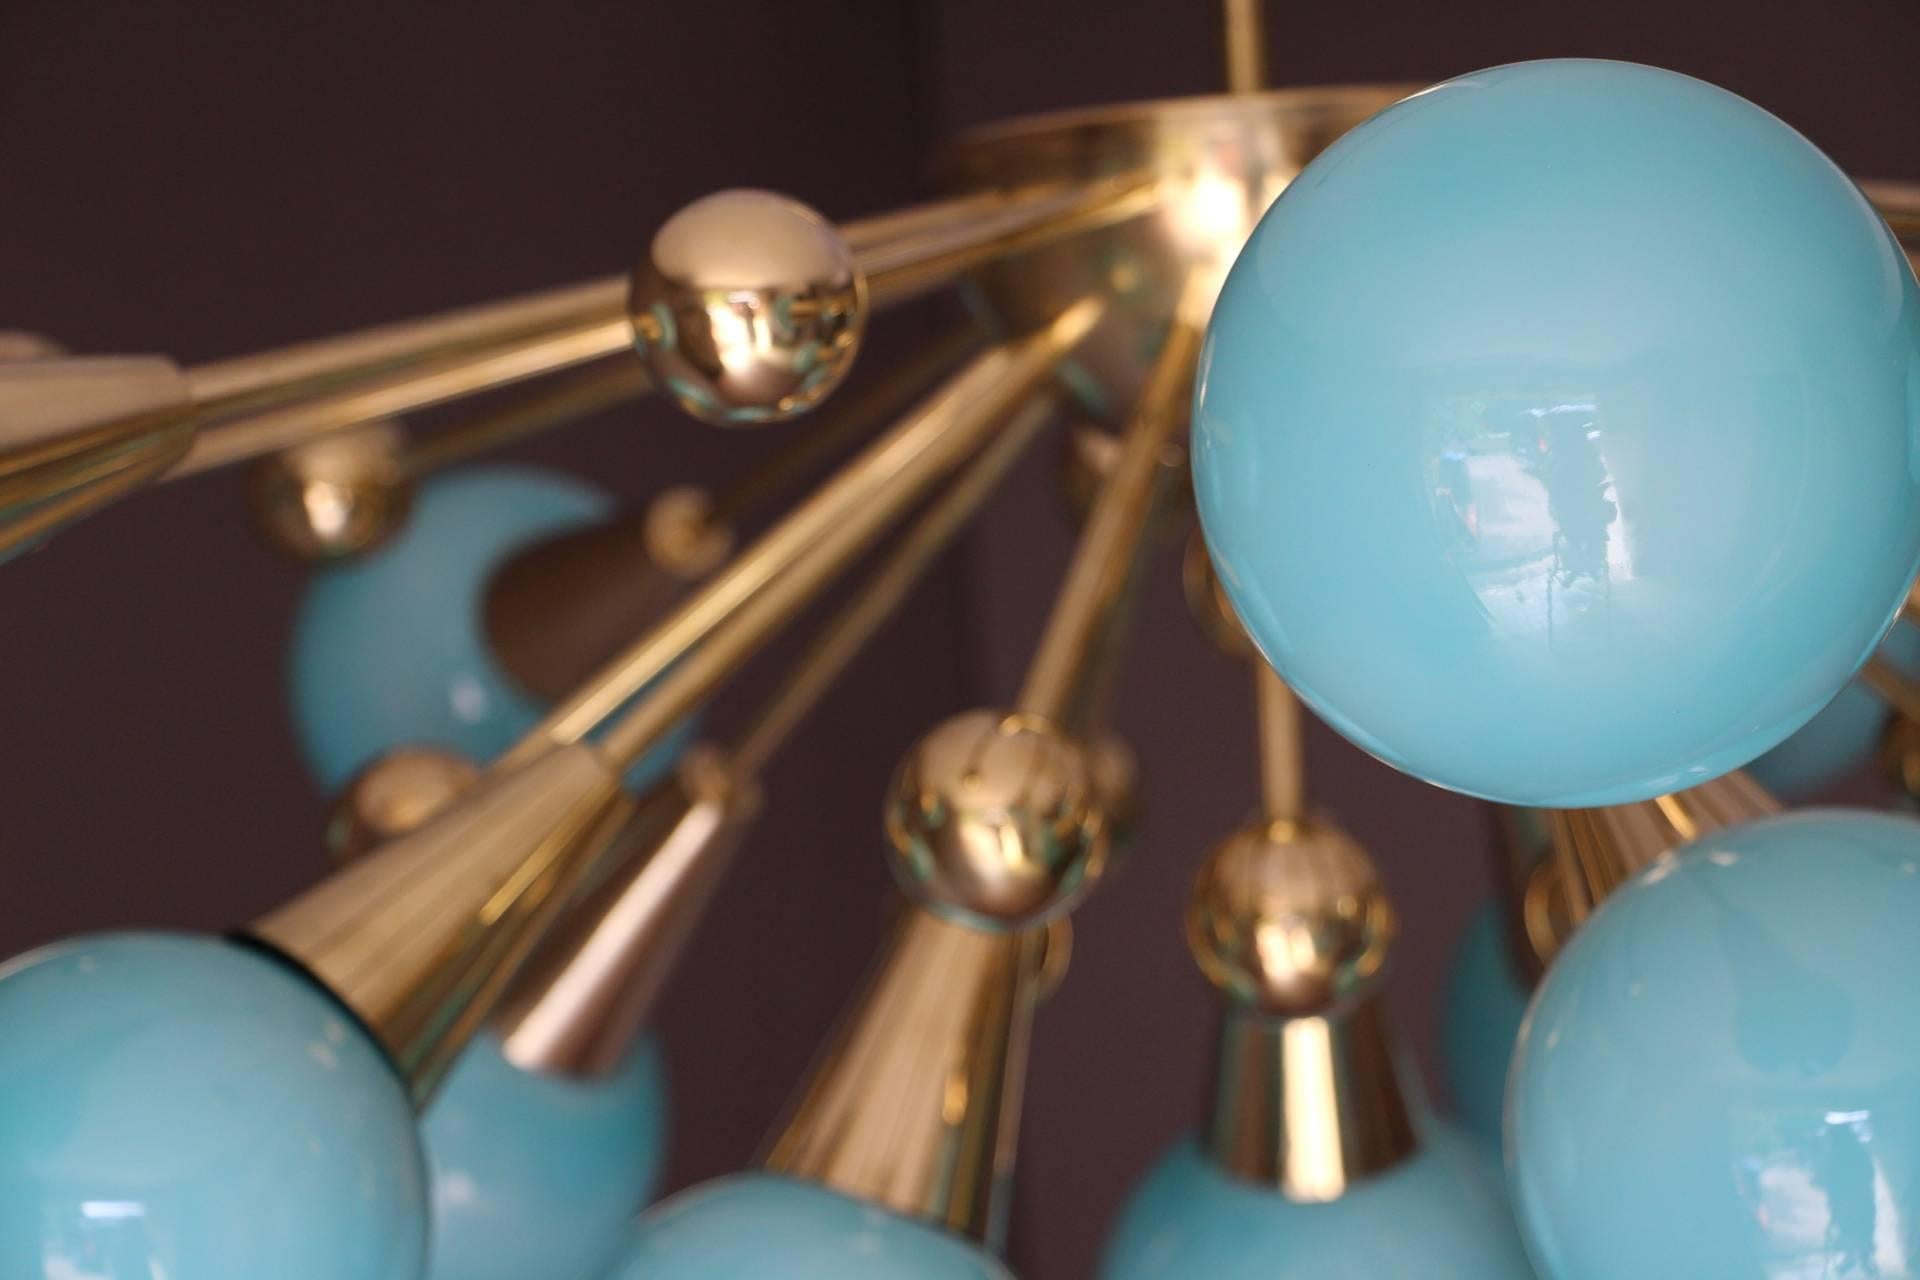 This brass chandelier features 15 turquoise blue Murano glass globes and 15 brass balls extends on brass stems from its center.
When light is on, its turquoise globes turn to light blue color.
Unusual dimensions: Only 60 cm height and 110 cm